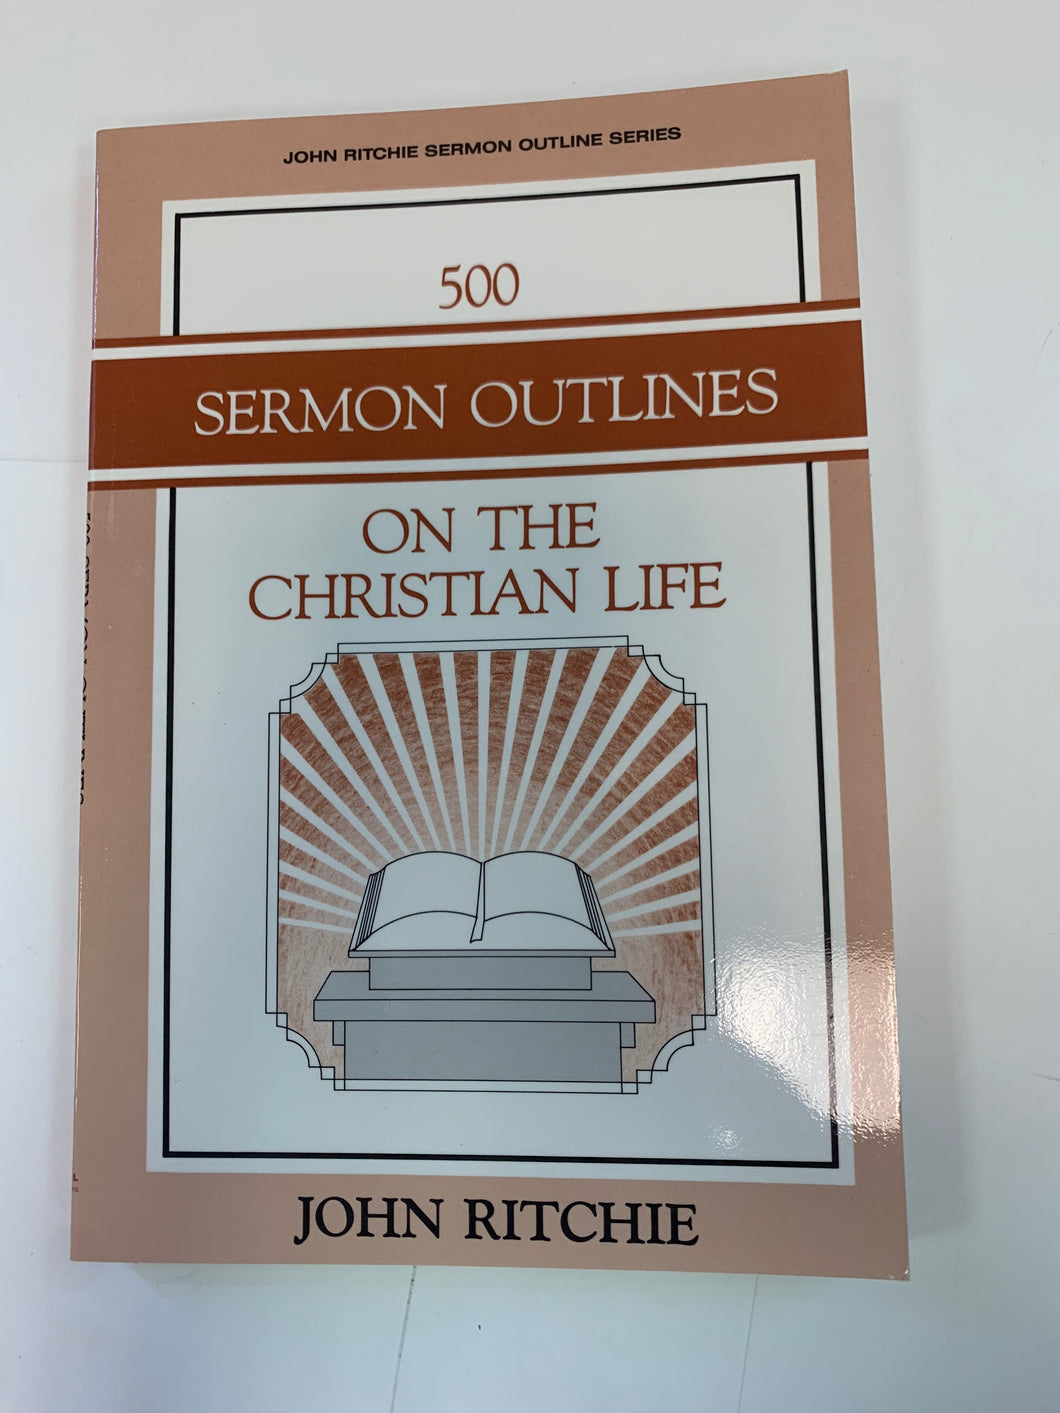 500 Sermon Outlines: On the Christian Life by John Ritchie